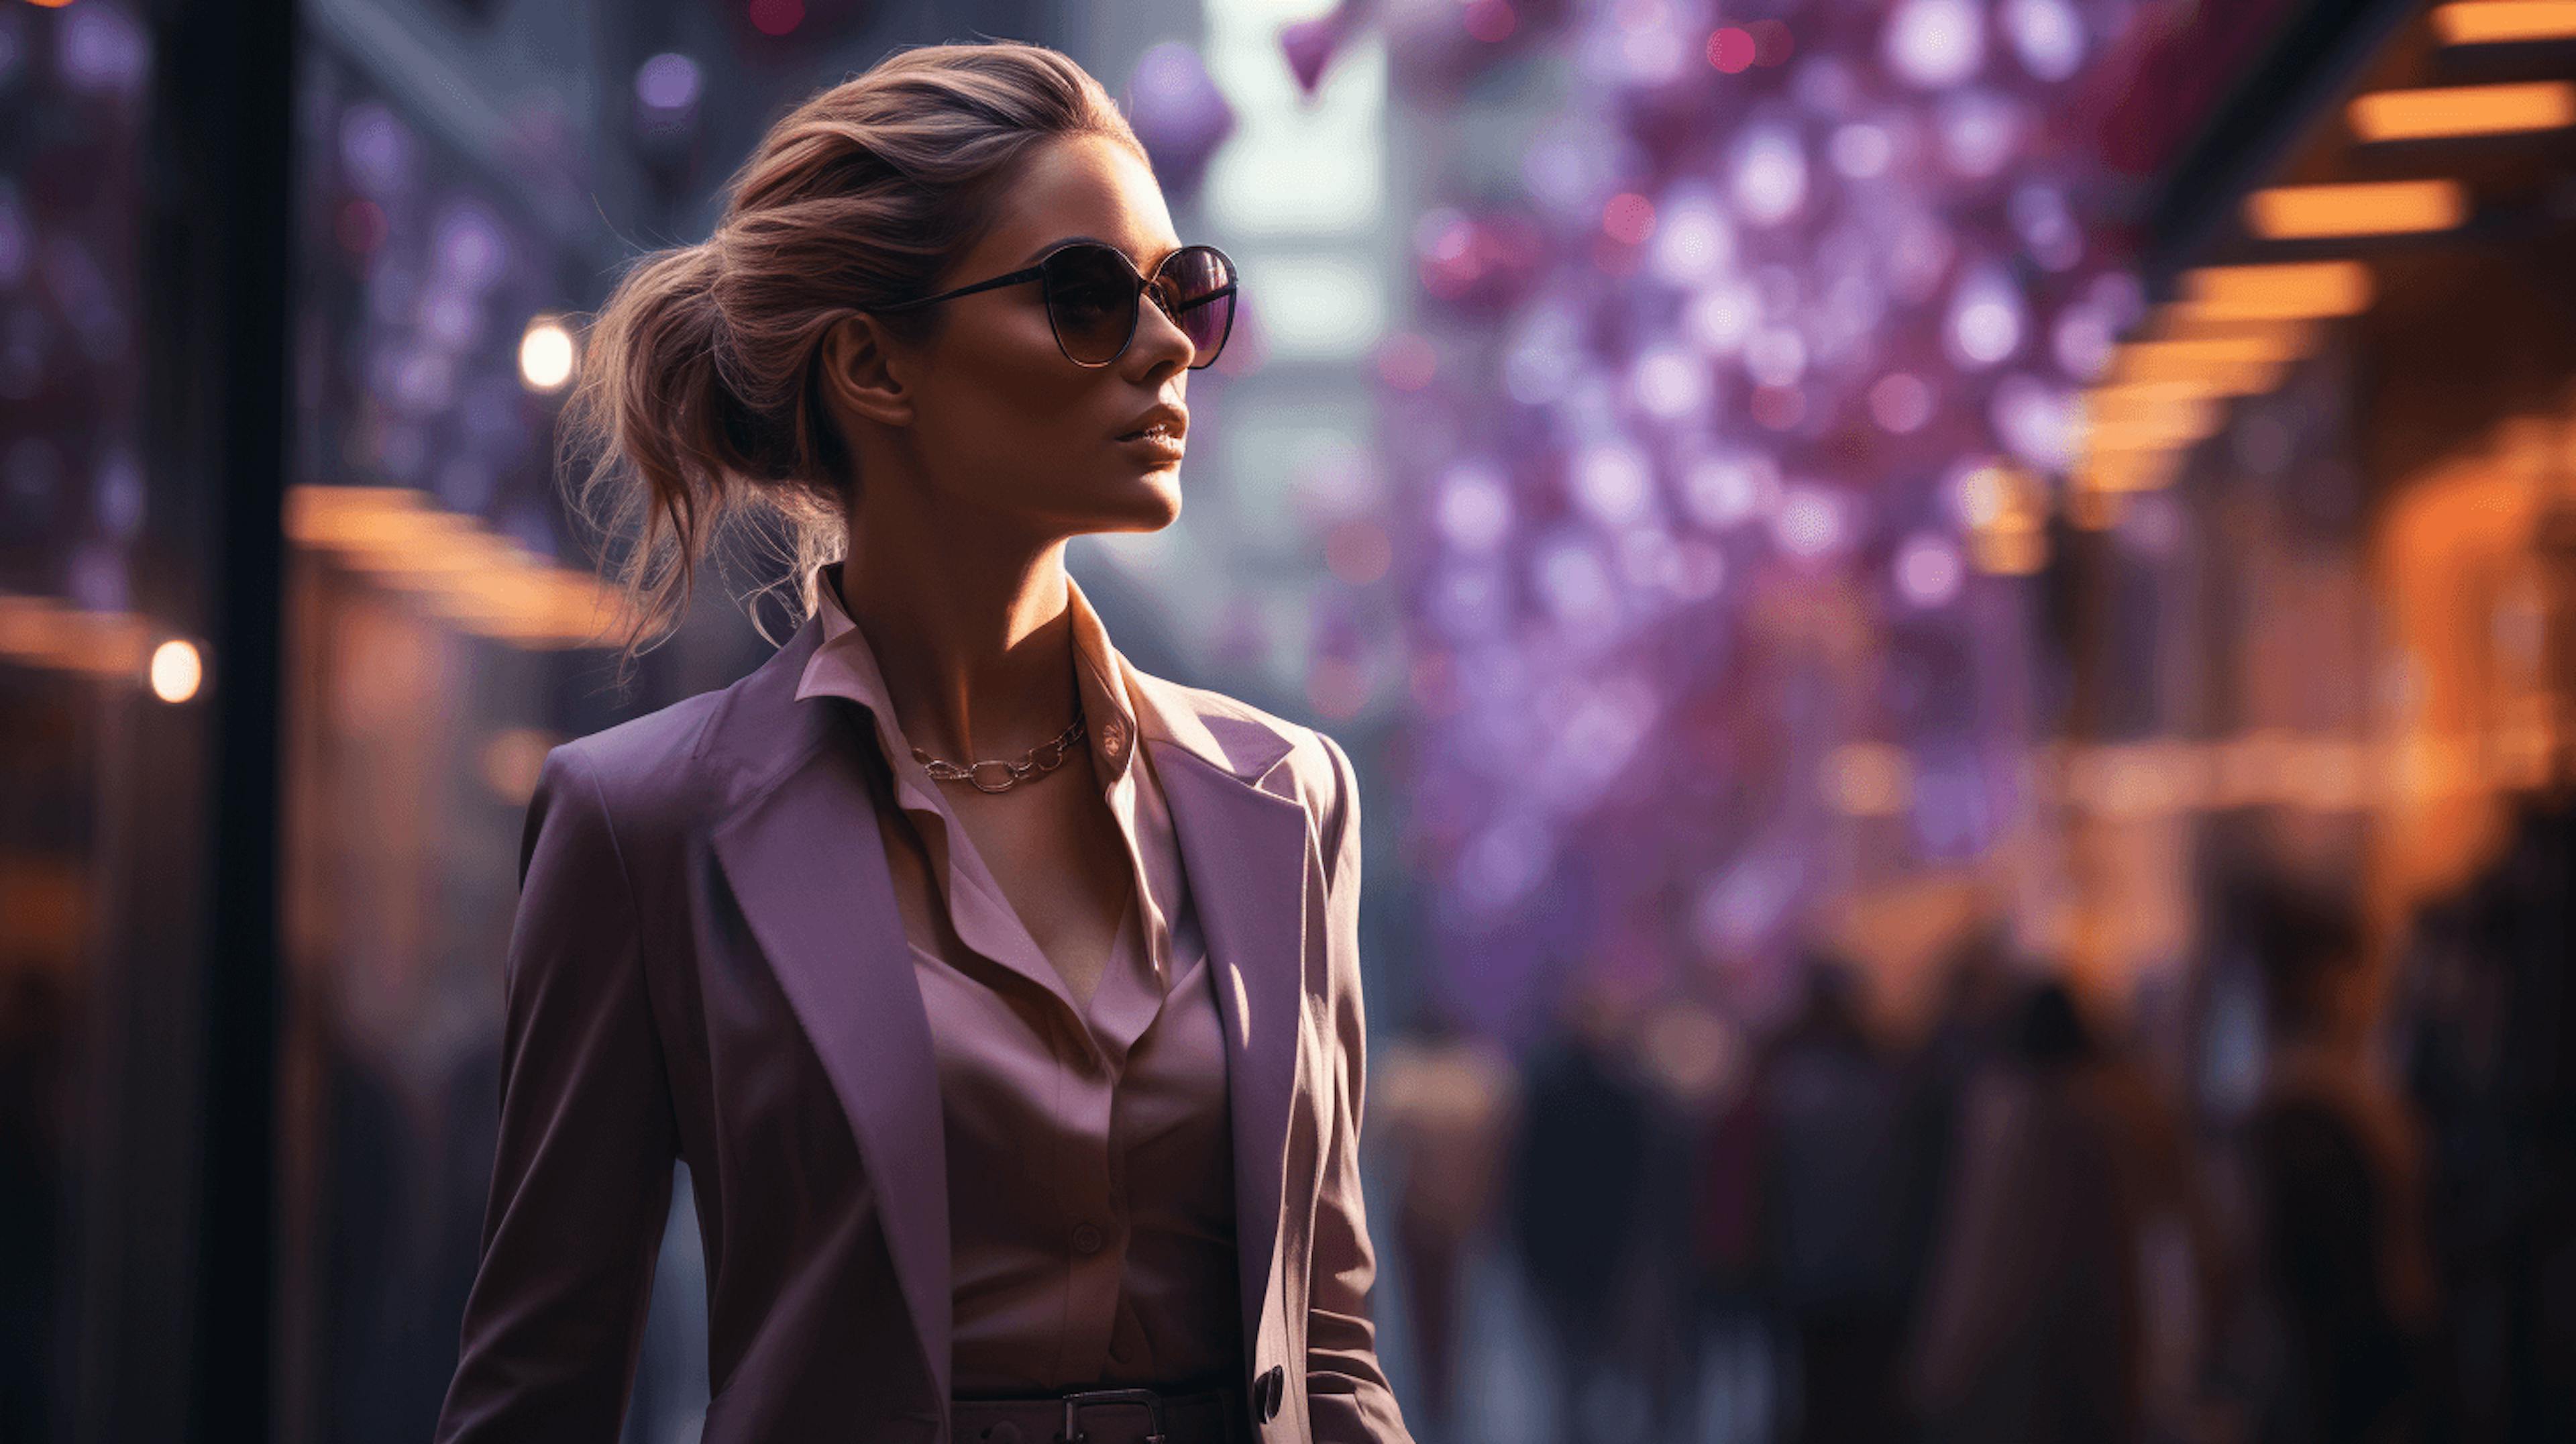 a female business person wearing sunglasses and a purple blazer